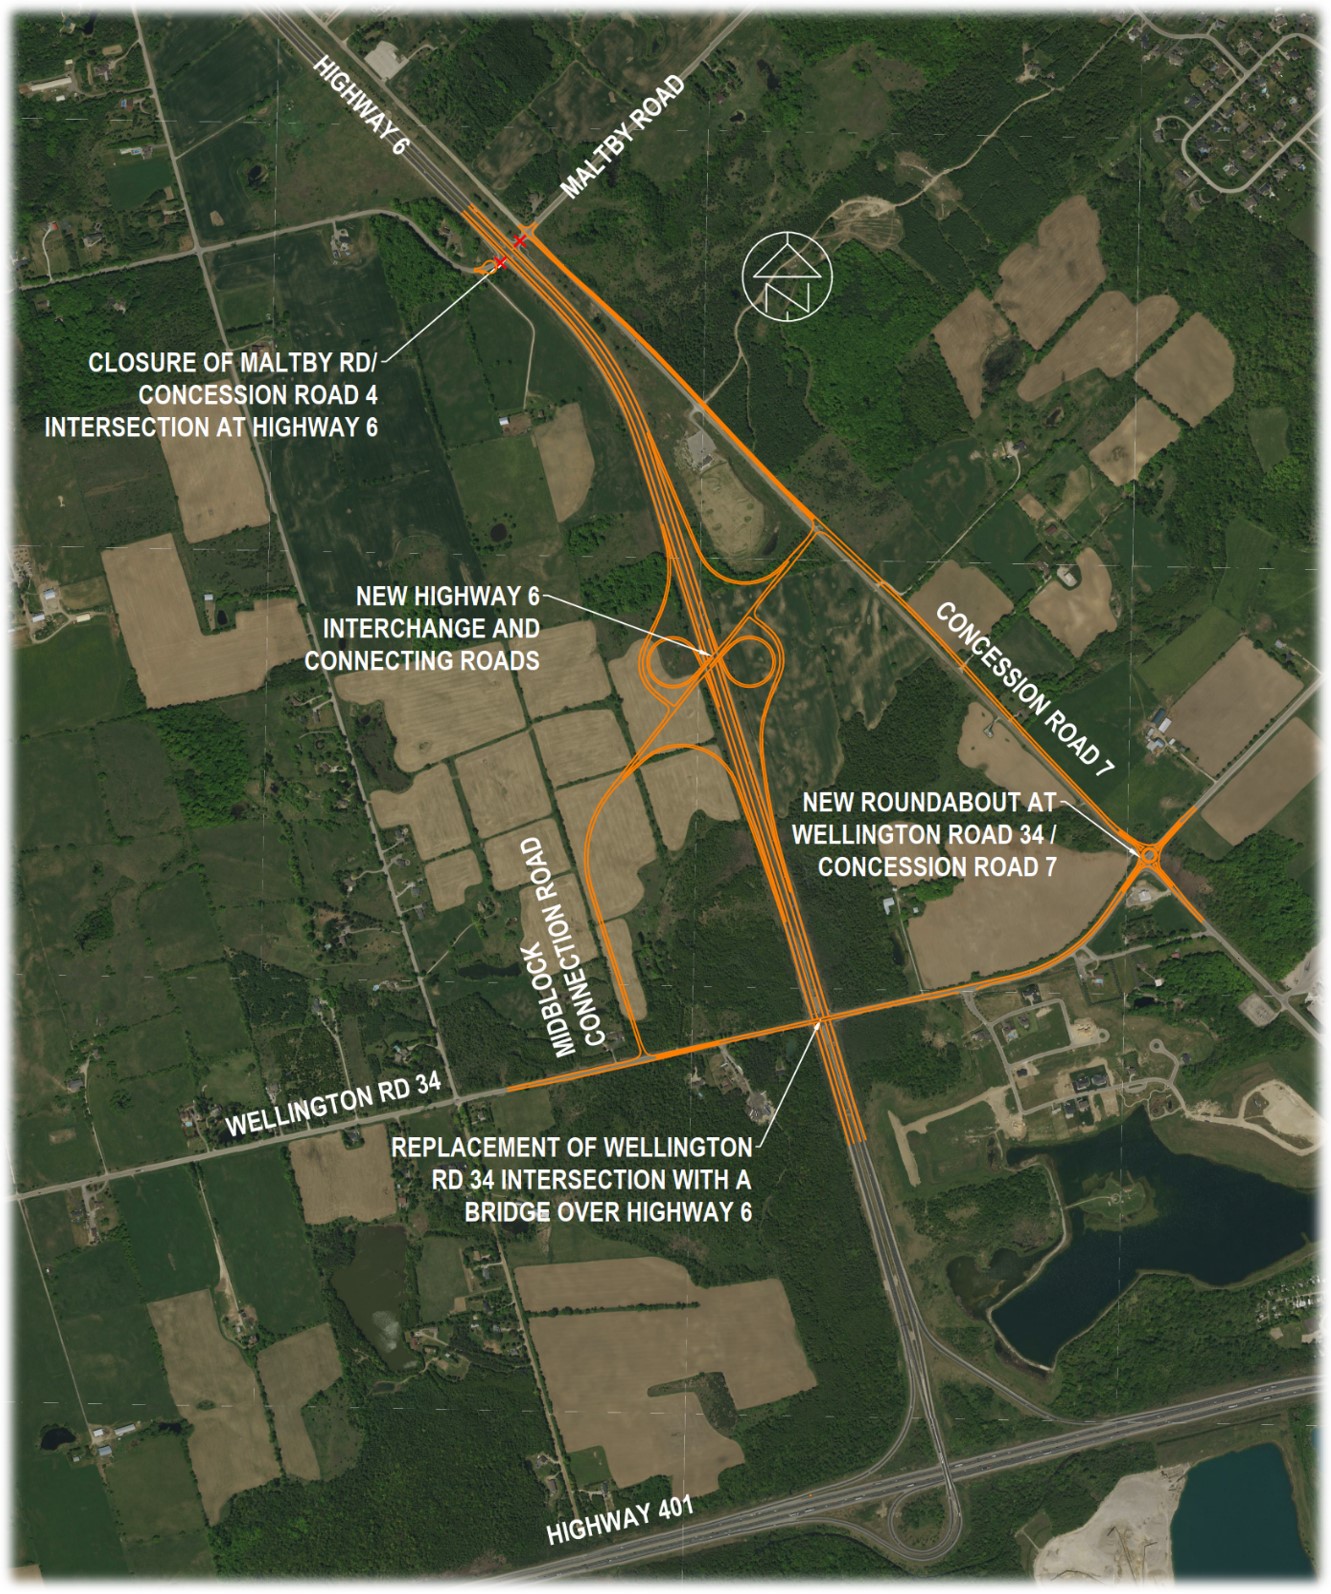 Aerial map of the Midblock Study Area, highlighting key components including: Closure of Malty Road and Concession 4 Intersection at Highway 6, Highway 6 Interchange and Connecting Roads, New Roundabout at Wellington Road 34 and Concession Road 7, Midblock Connection Road, Replacement of Wellington Road 34 Intersection with a Bridge over Highway 6